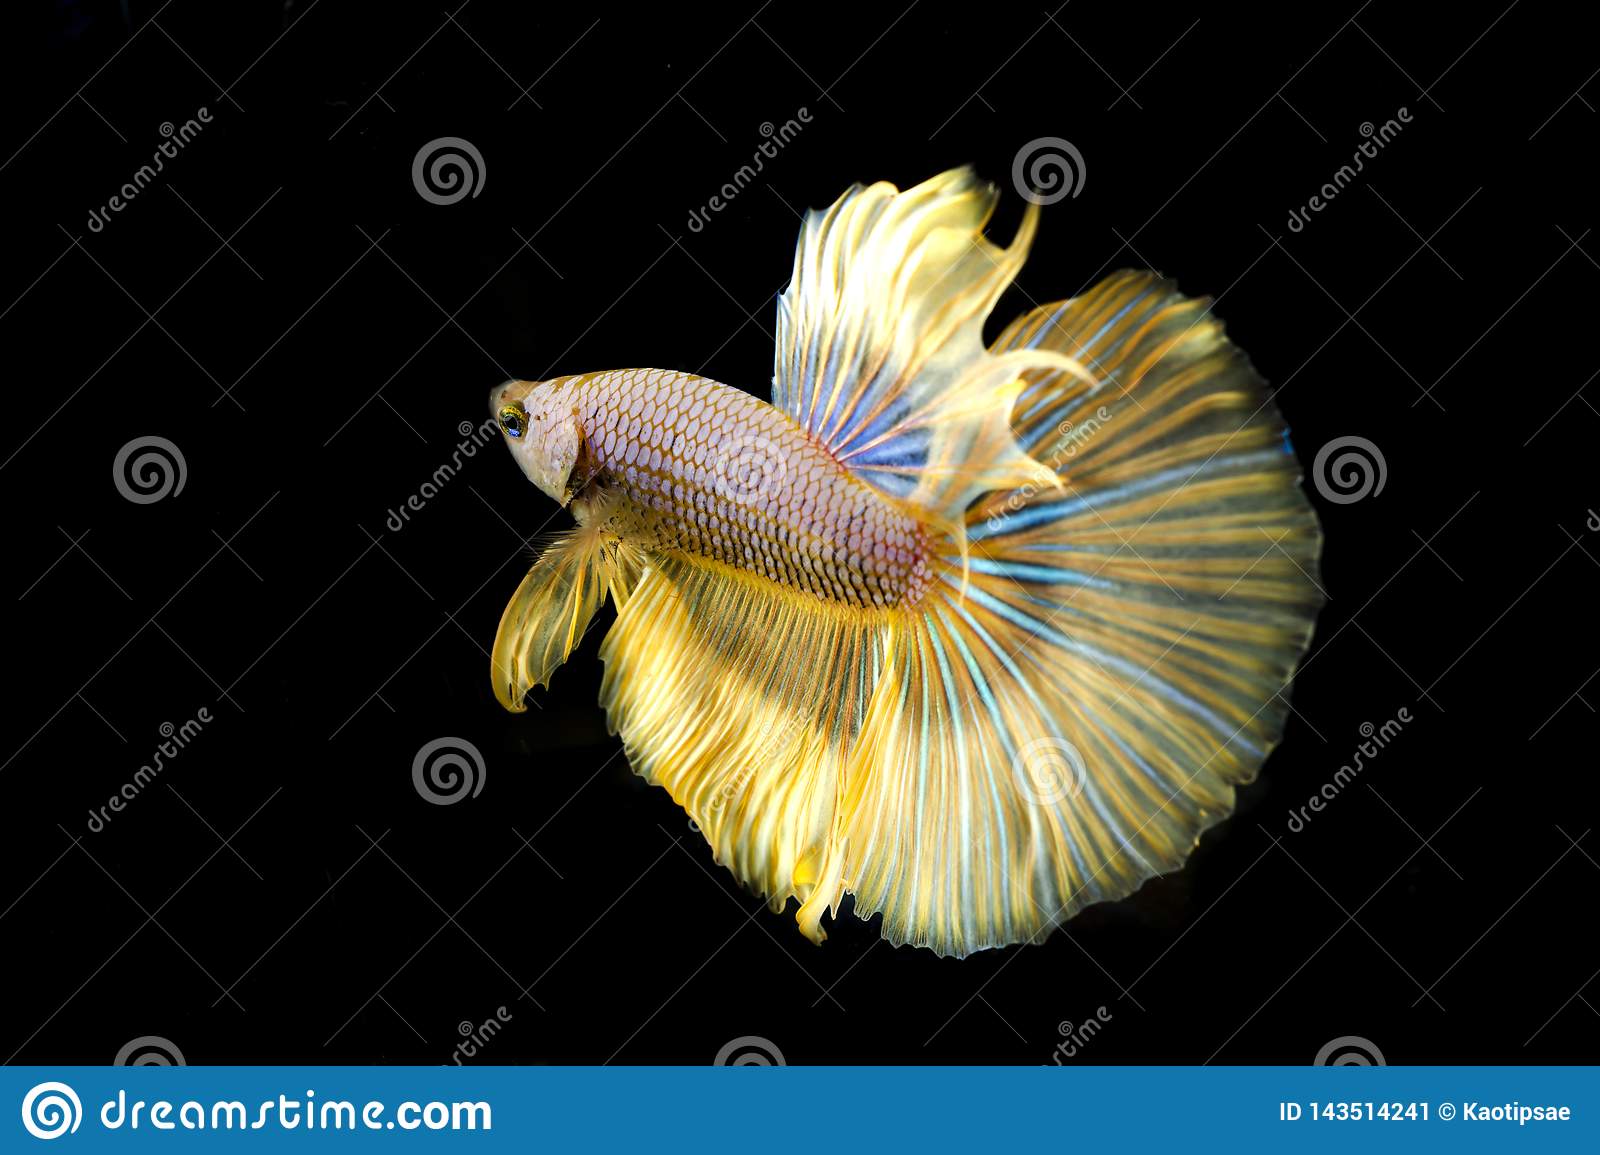 The Alluring and Rich Beauty of Betta Fish with a Gold Coloration 2